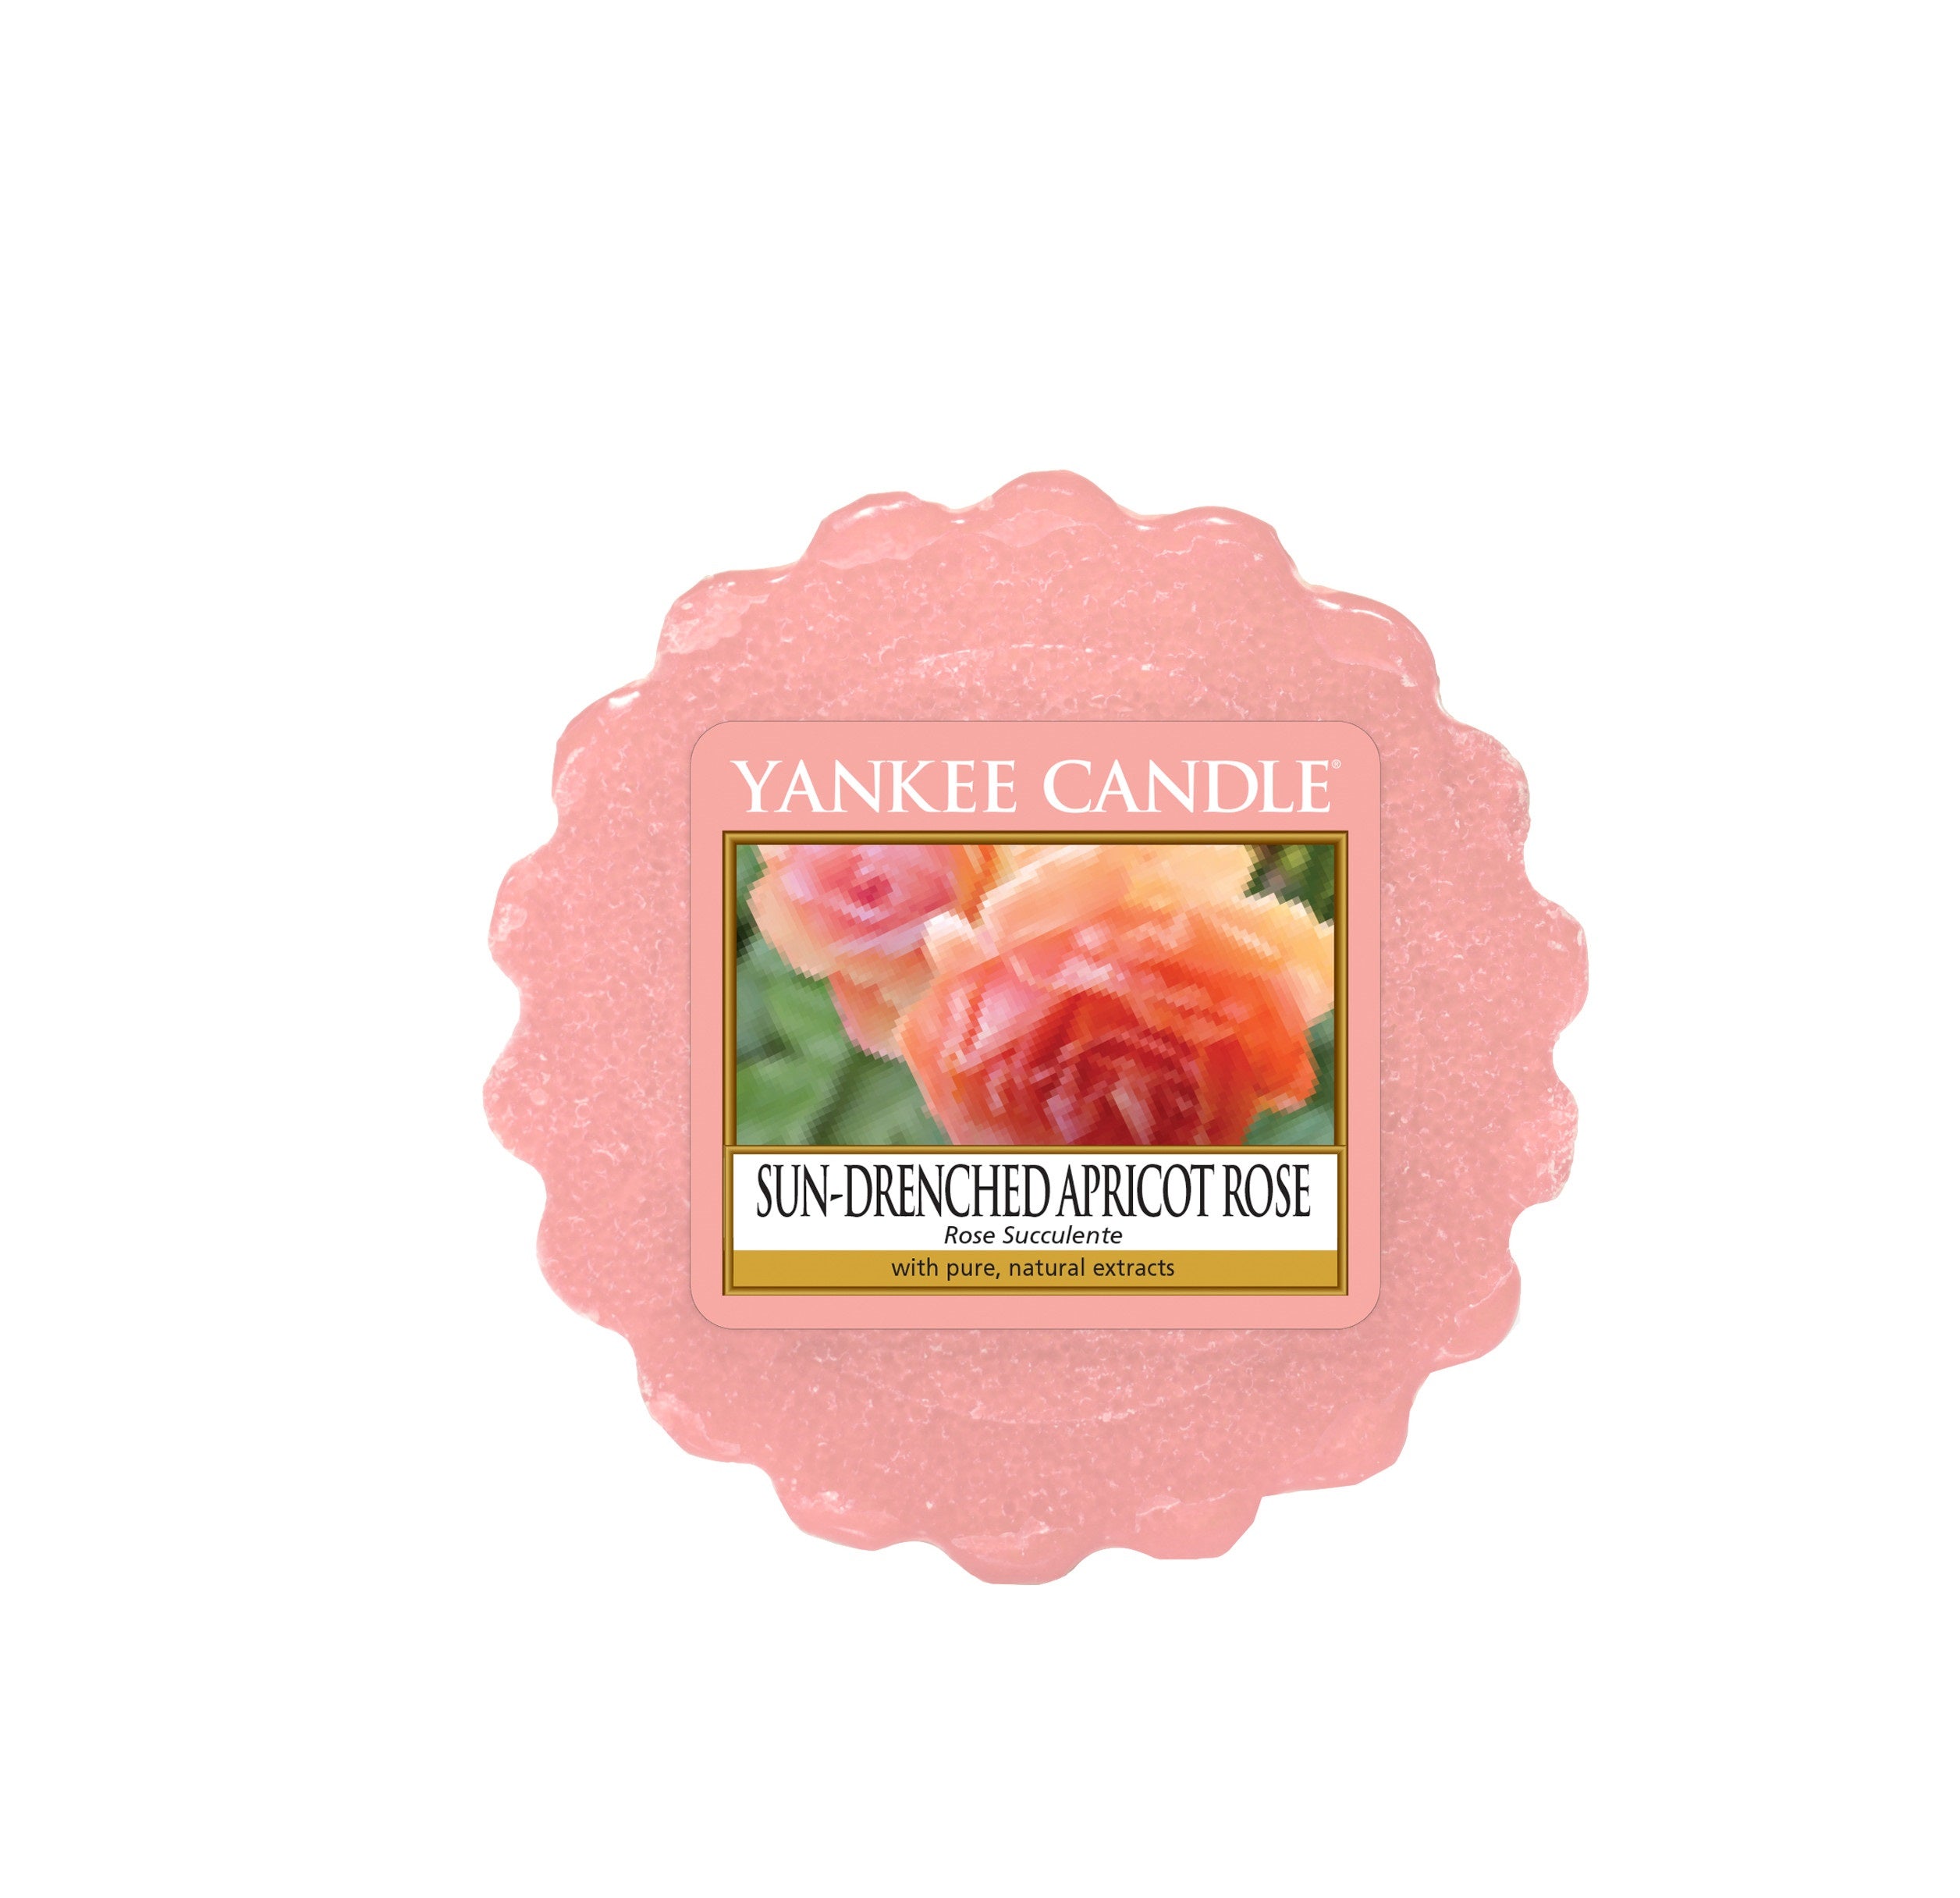 SUN-DRENCHED APRICOT ROSE -Yankee Candle- Tart